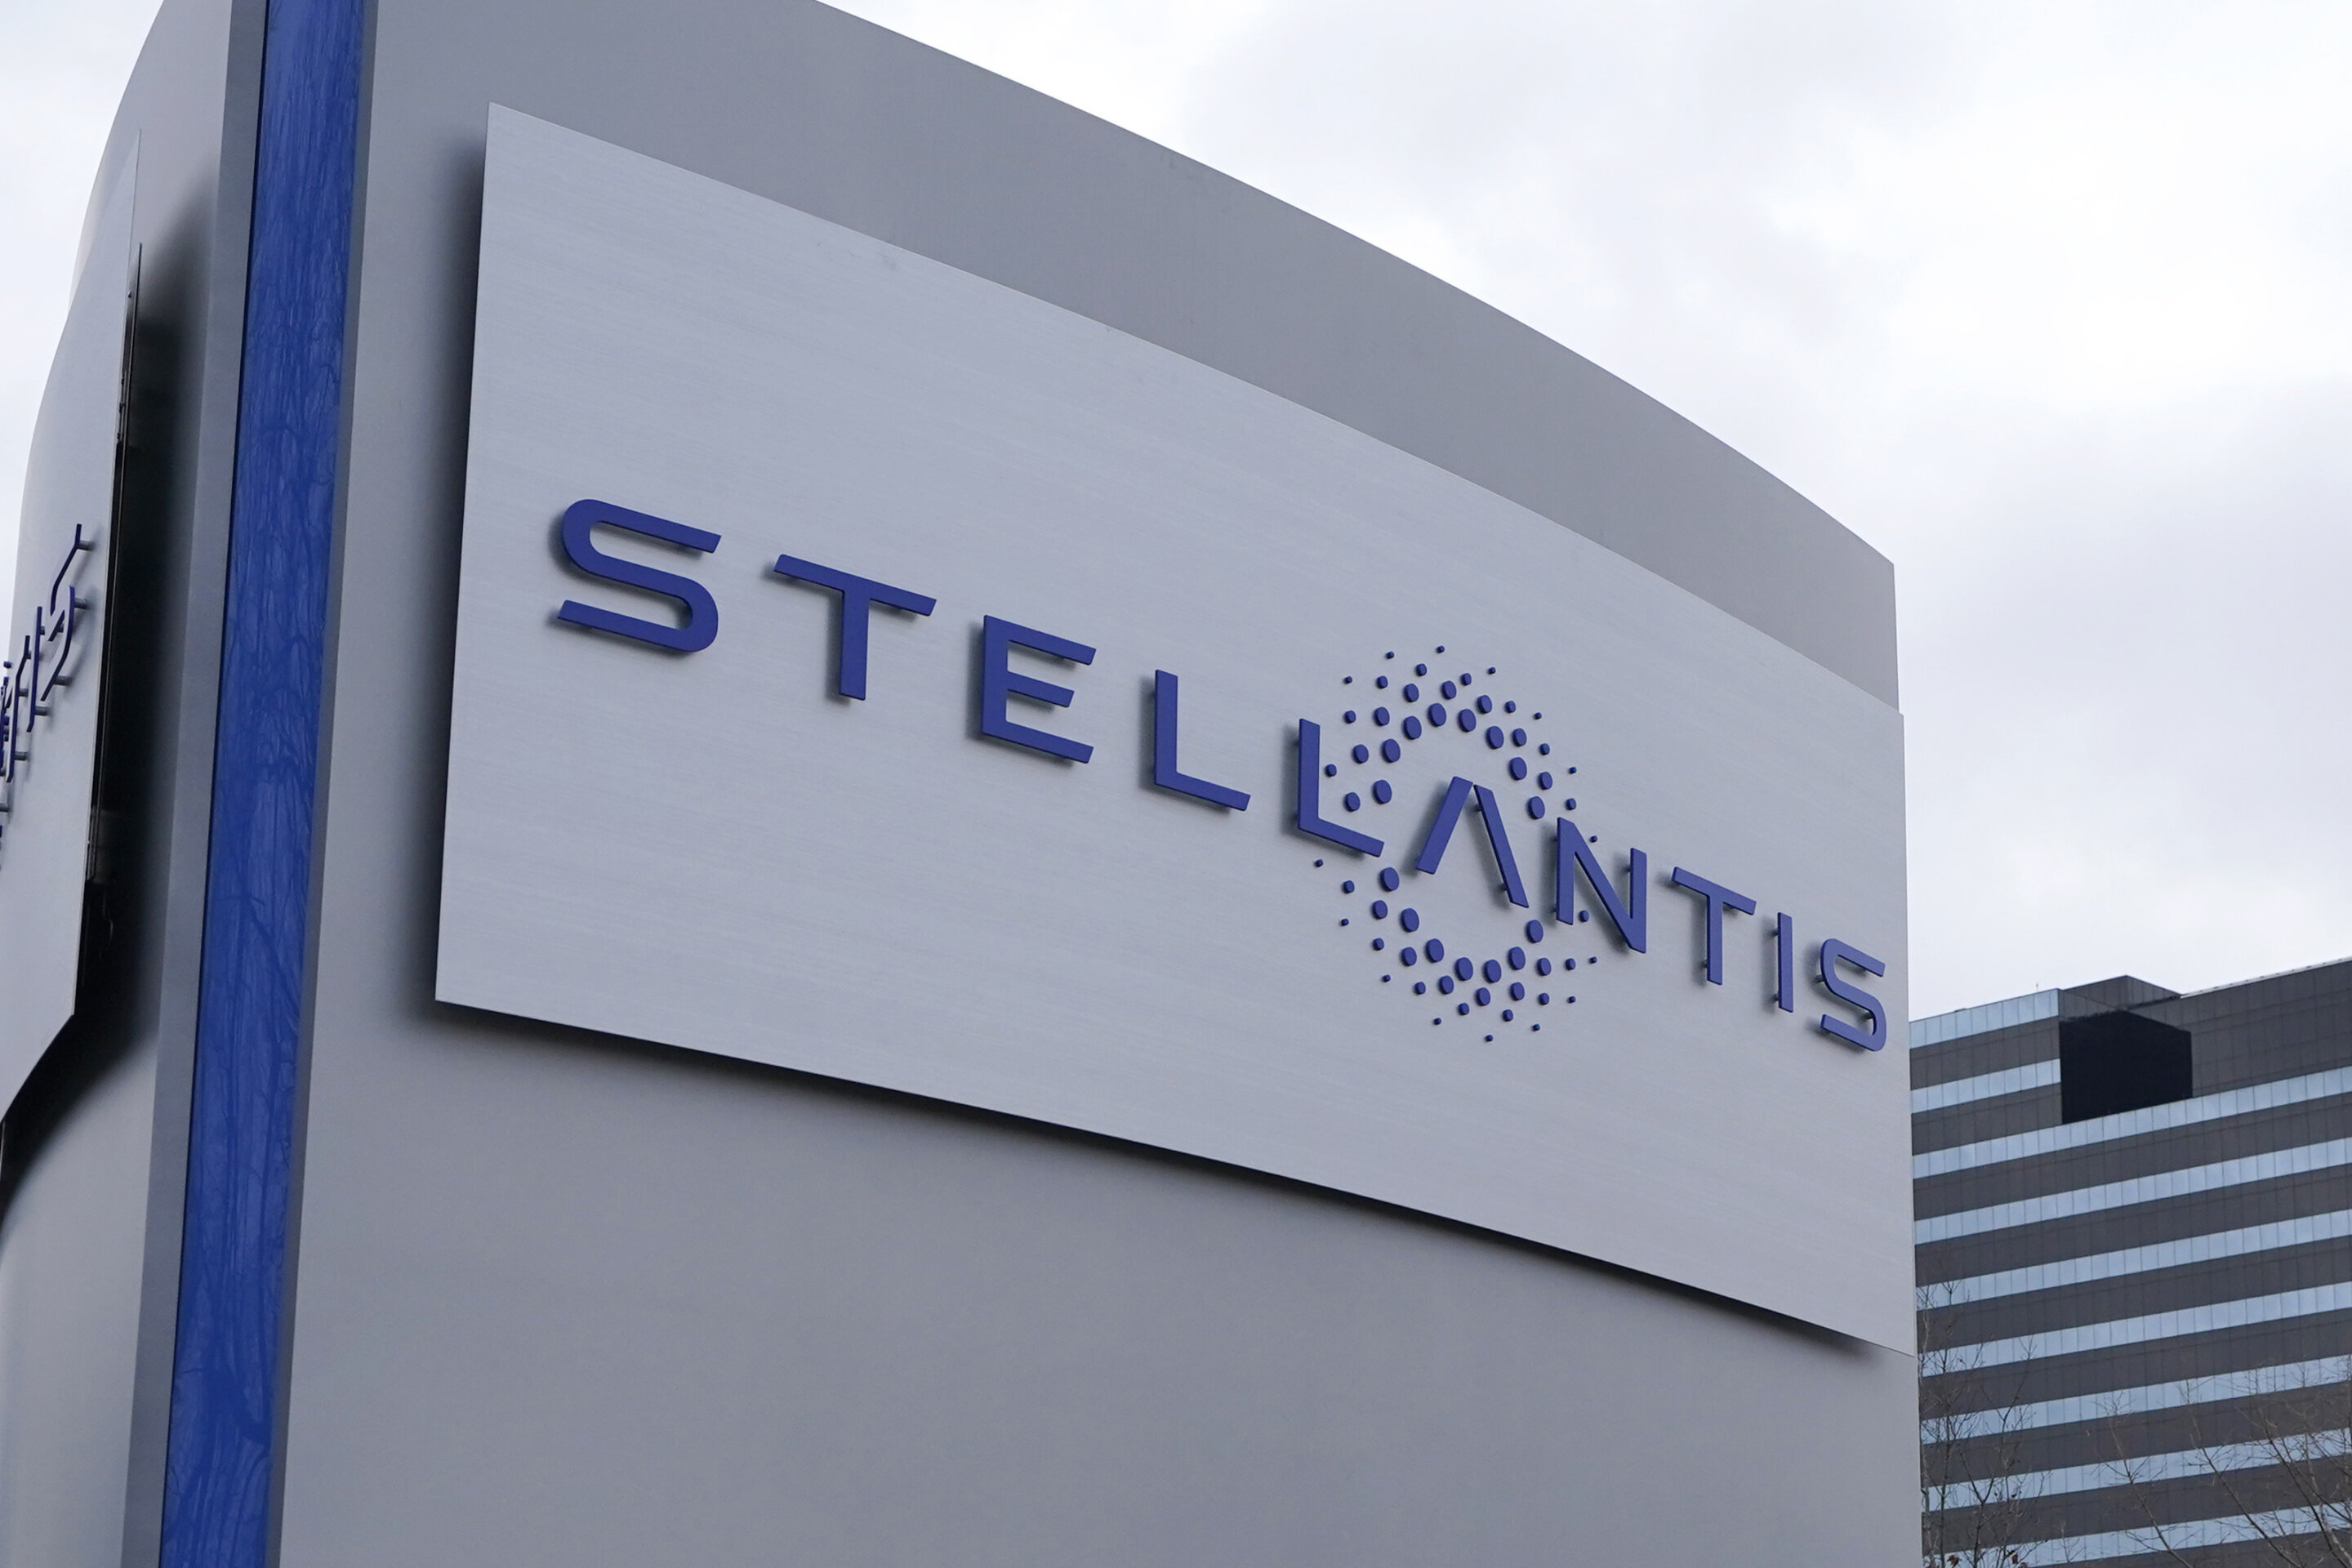 Stellantis says new small- and medium-sized electric vehicles will get up to 435 miles per charge